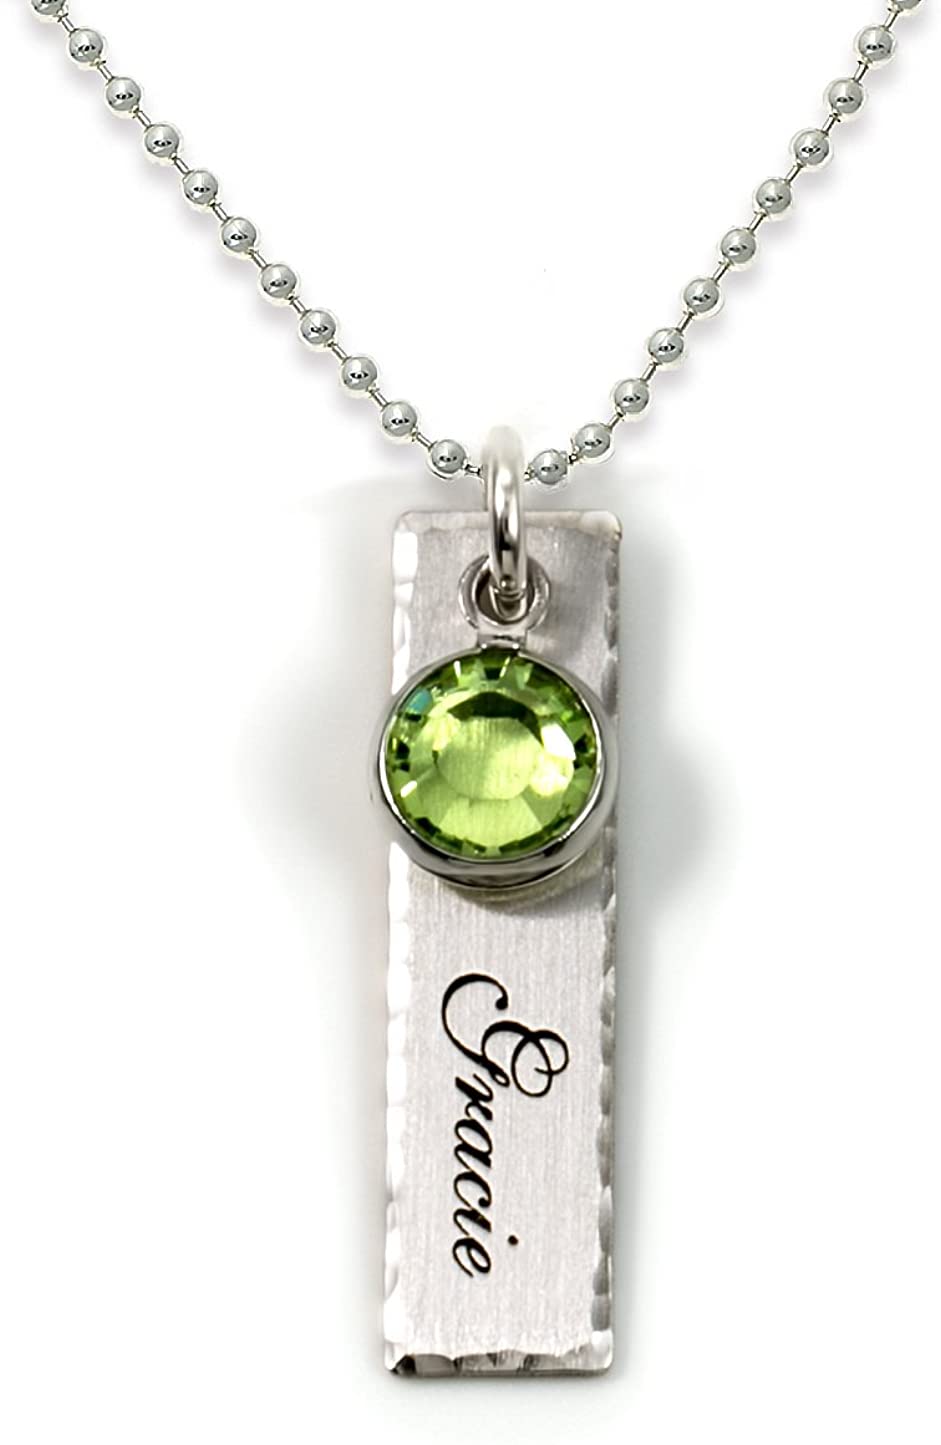 Personalized Single Edge-Hammered Charm Necklace for Women and Moms